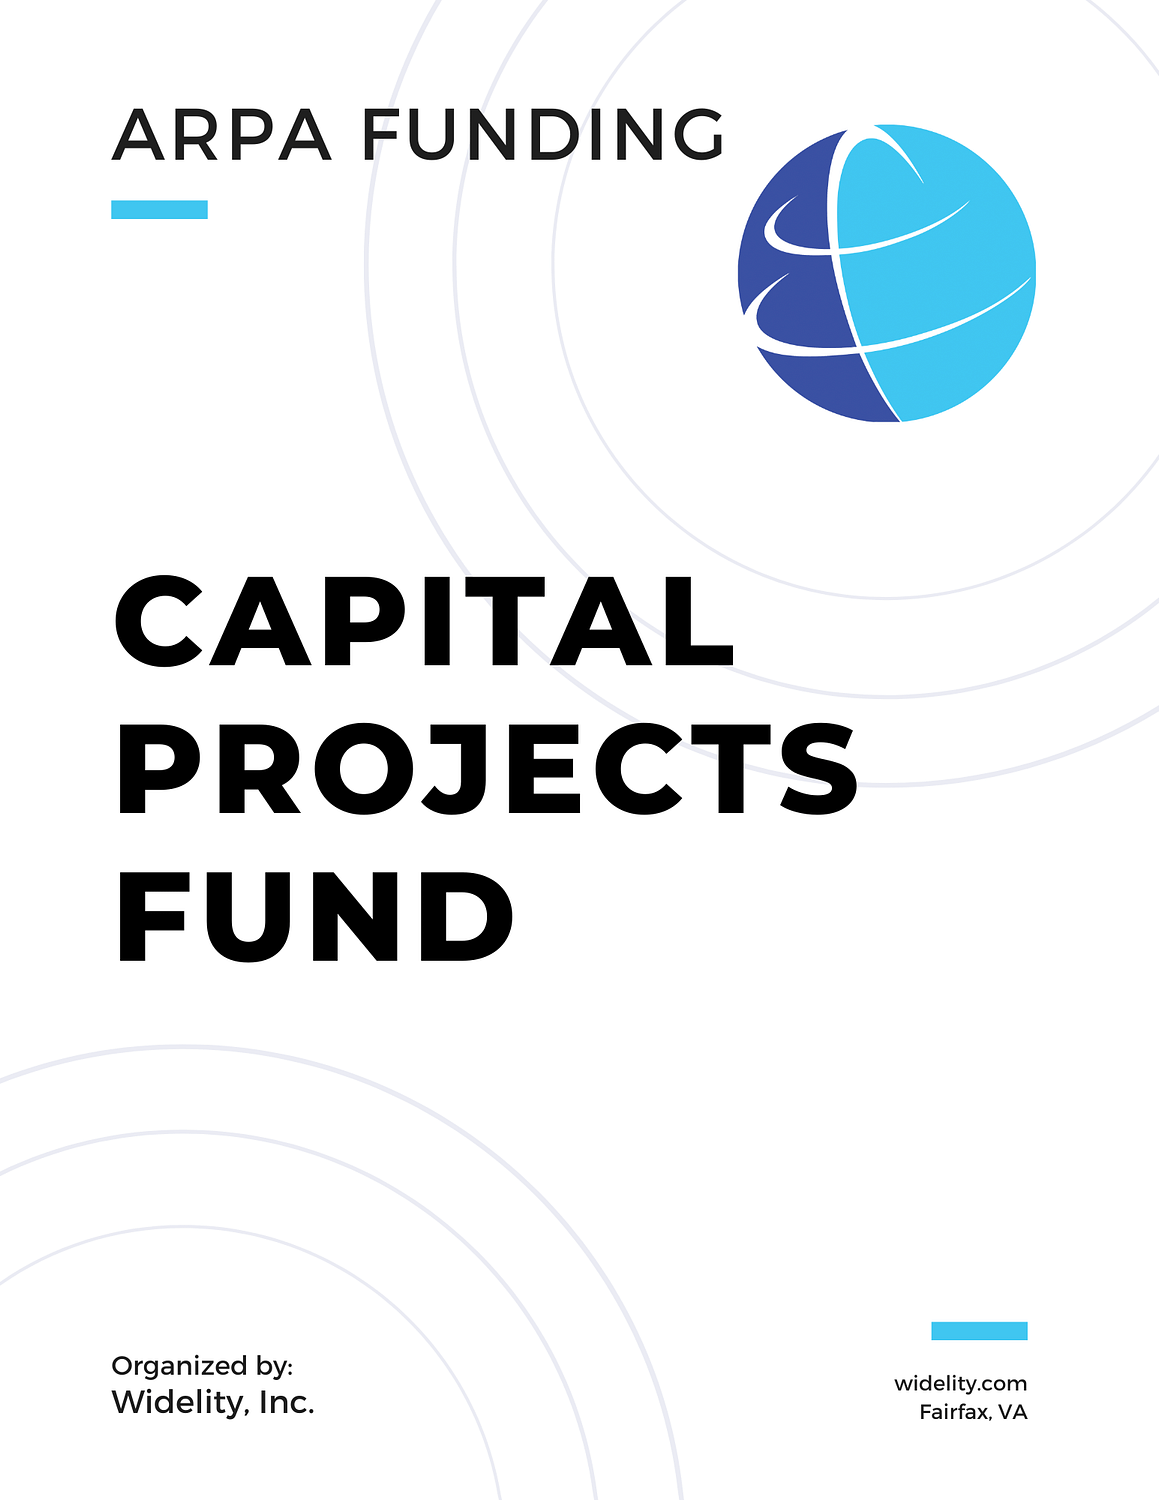 Capital Projects Fund Program Information Packet, summarizing the grant funding for broadband and other connectivity projects